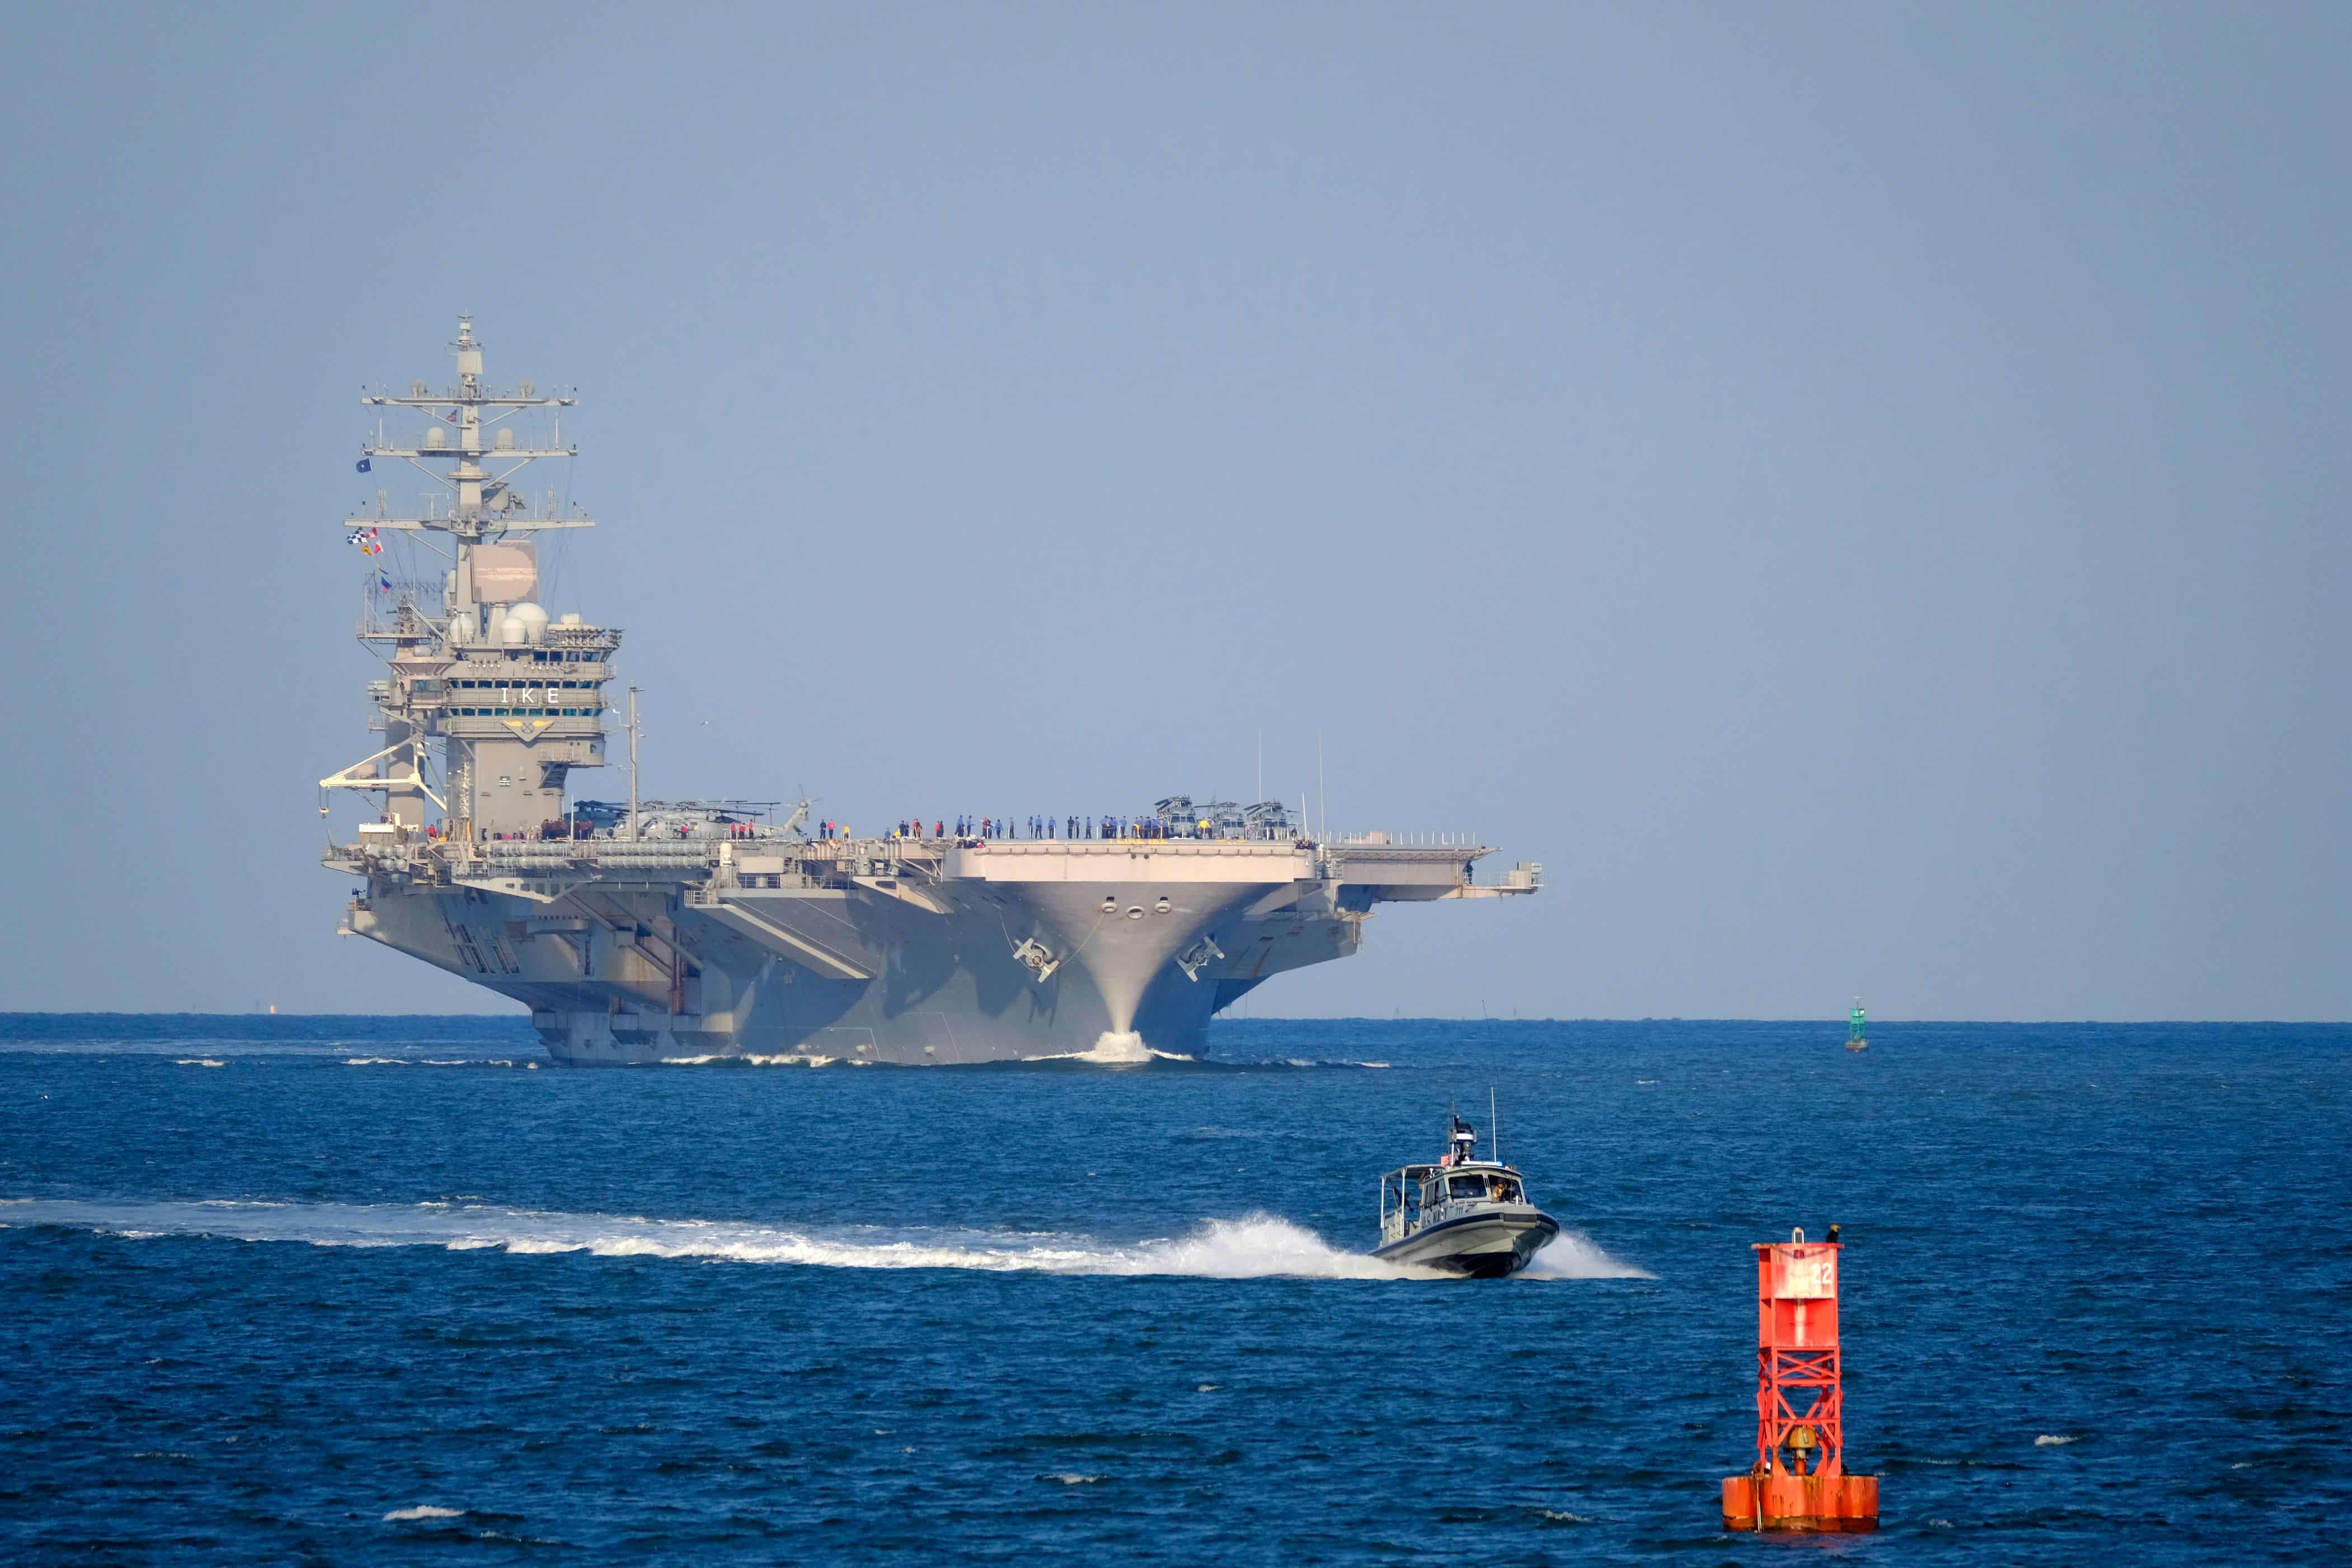 NORFOLK (Sept. 7, 2019) The Nimitz-class aircraft carrier USS Dwight D. Eisenhower (CVN 69) returns to its homeport of Norfolk, Va. after being sent to sea to avoid the effects of Hurricane Dorian. Hampton Roads area ships are returning to their homeport now that the threat from Hurricane Dorian has passed. (Photo by Nancy E. Sheppard/Released)